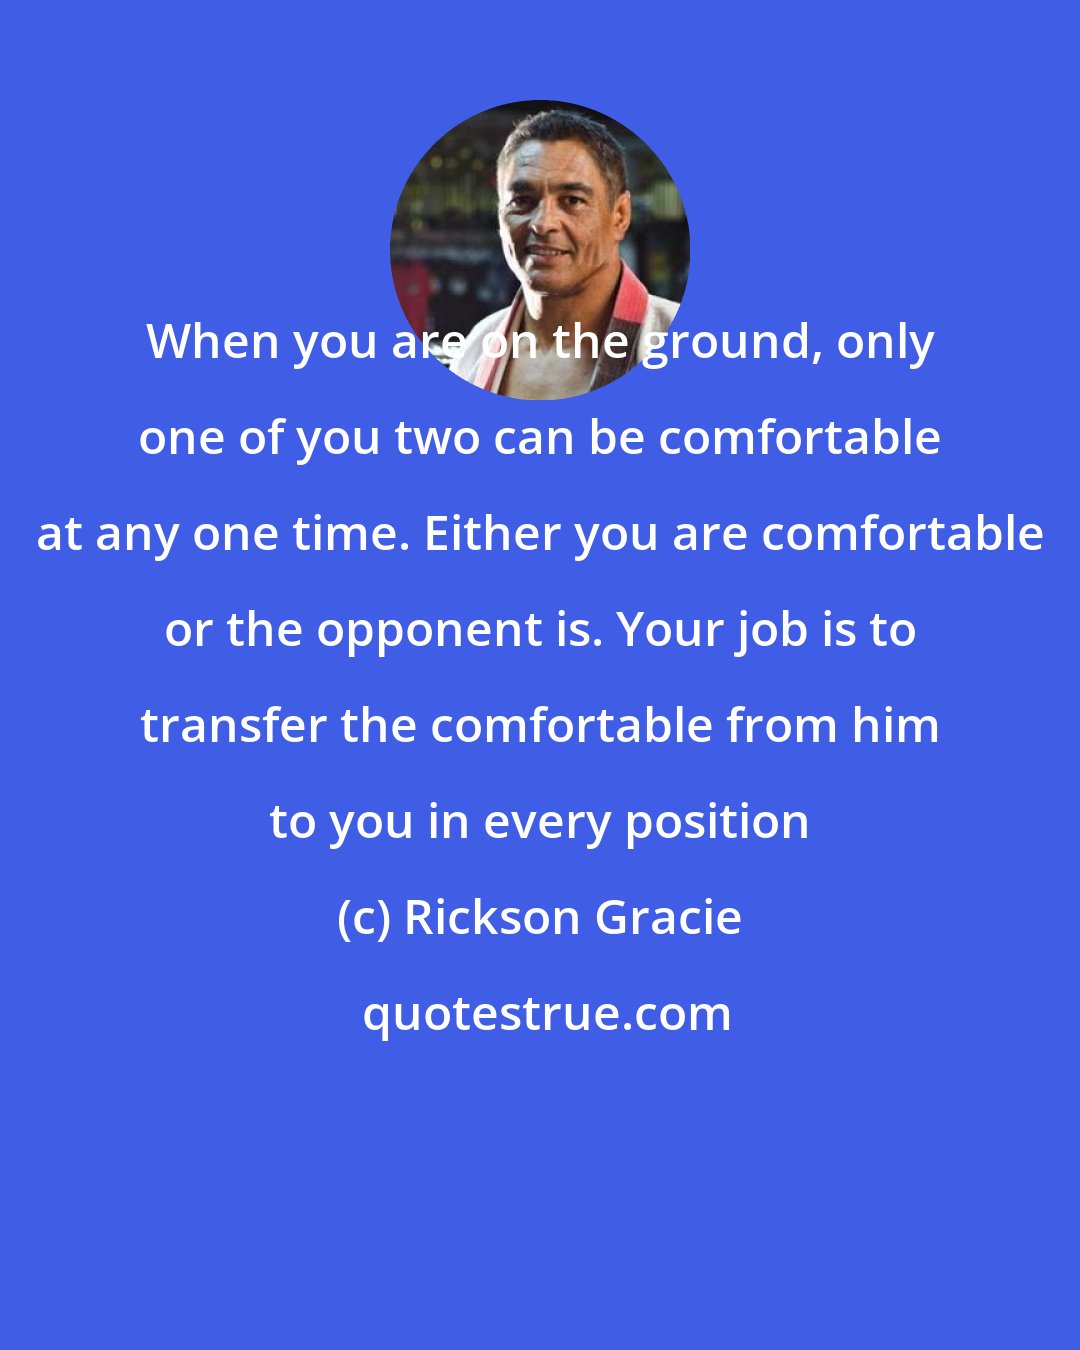 Rickson Gracie: When you are on the ground, only one of you two can be comfortable at any one time. Either you are comfortable or the opponent is. Your job is to transfer the comfortable from him to you in every position